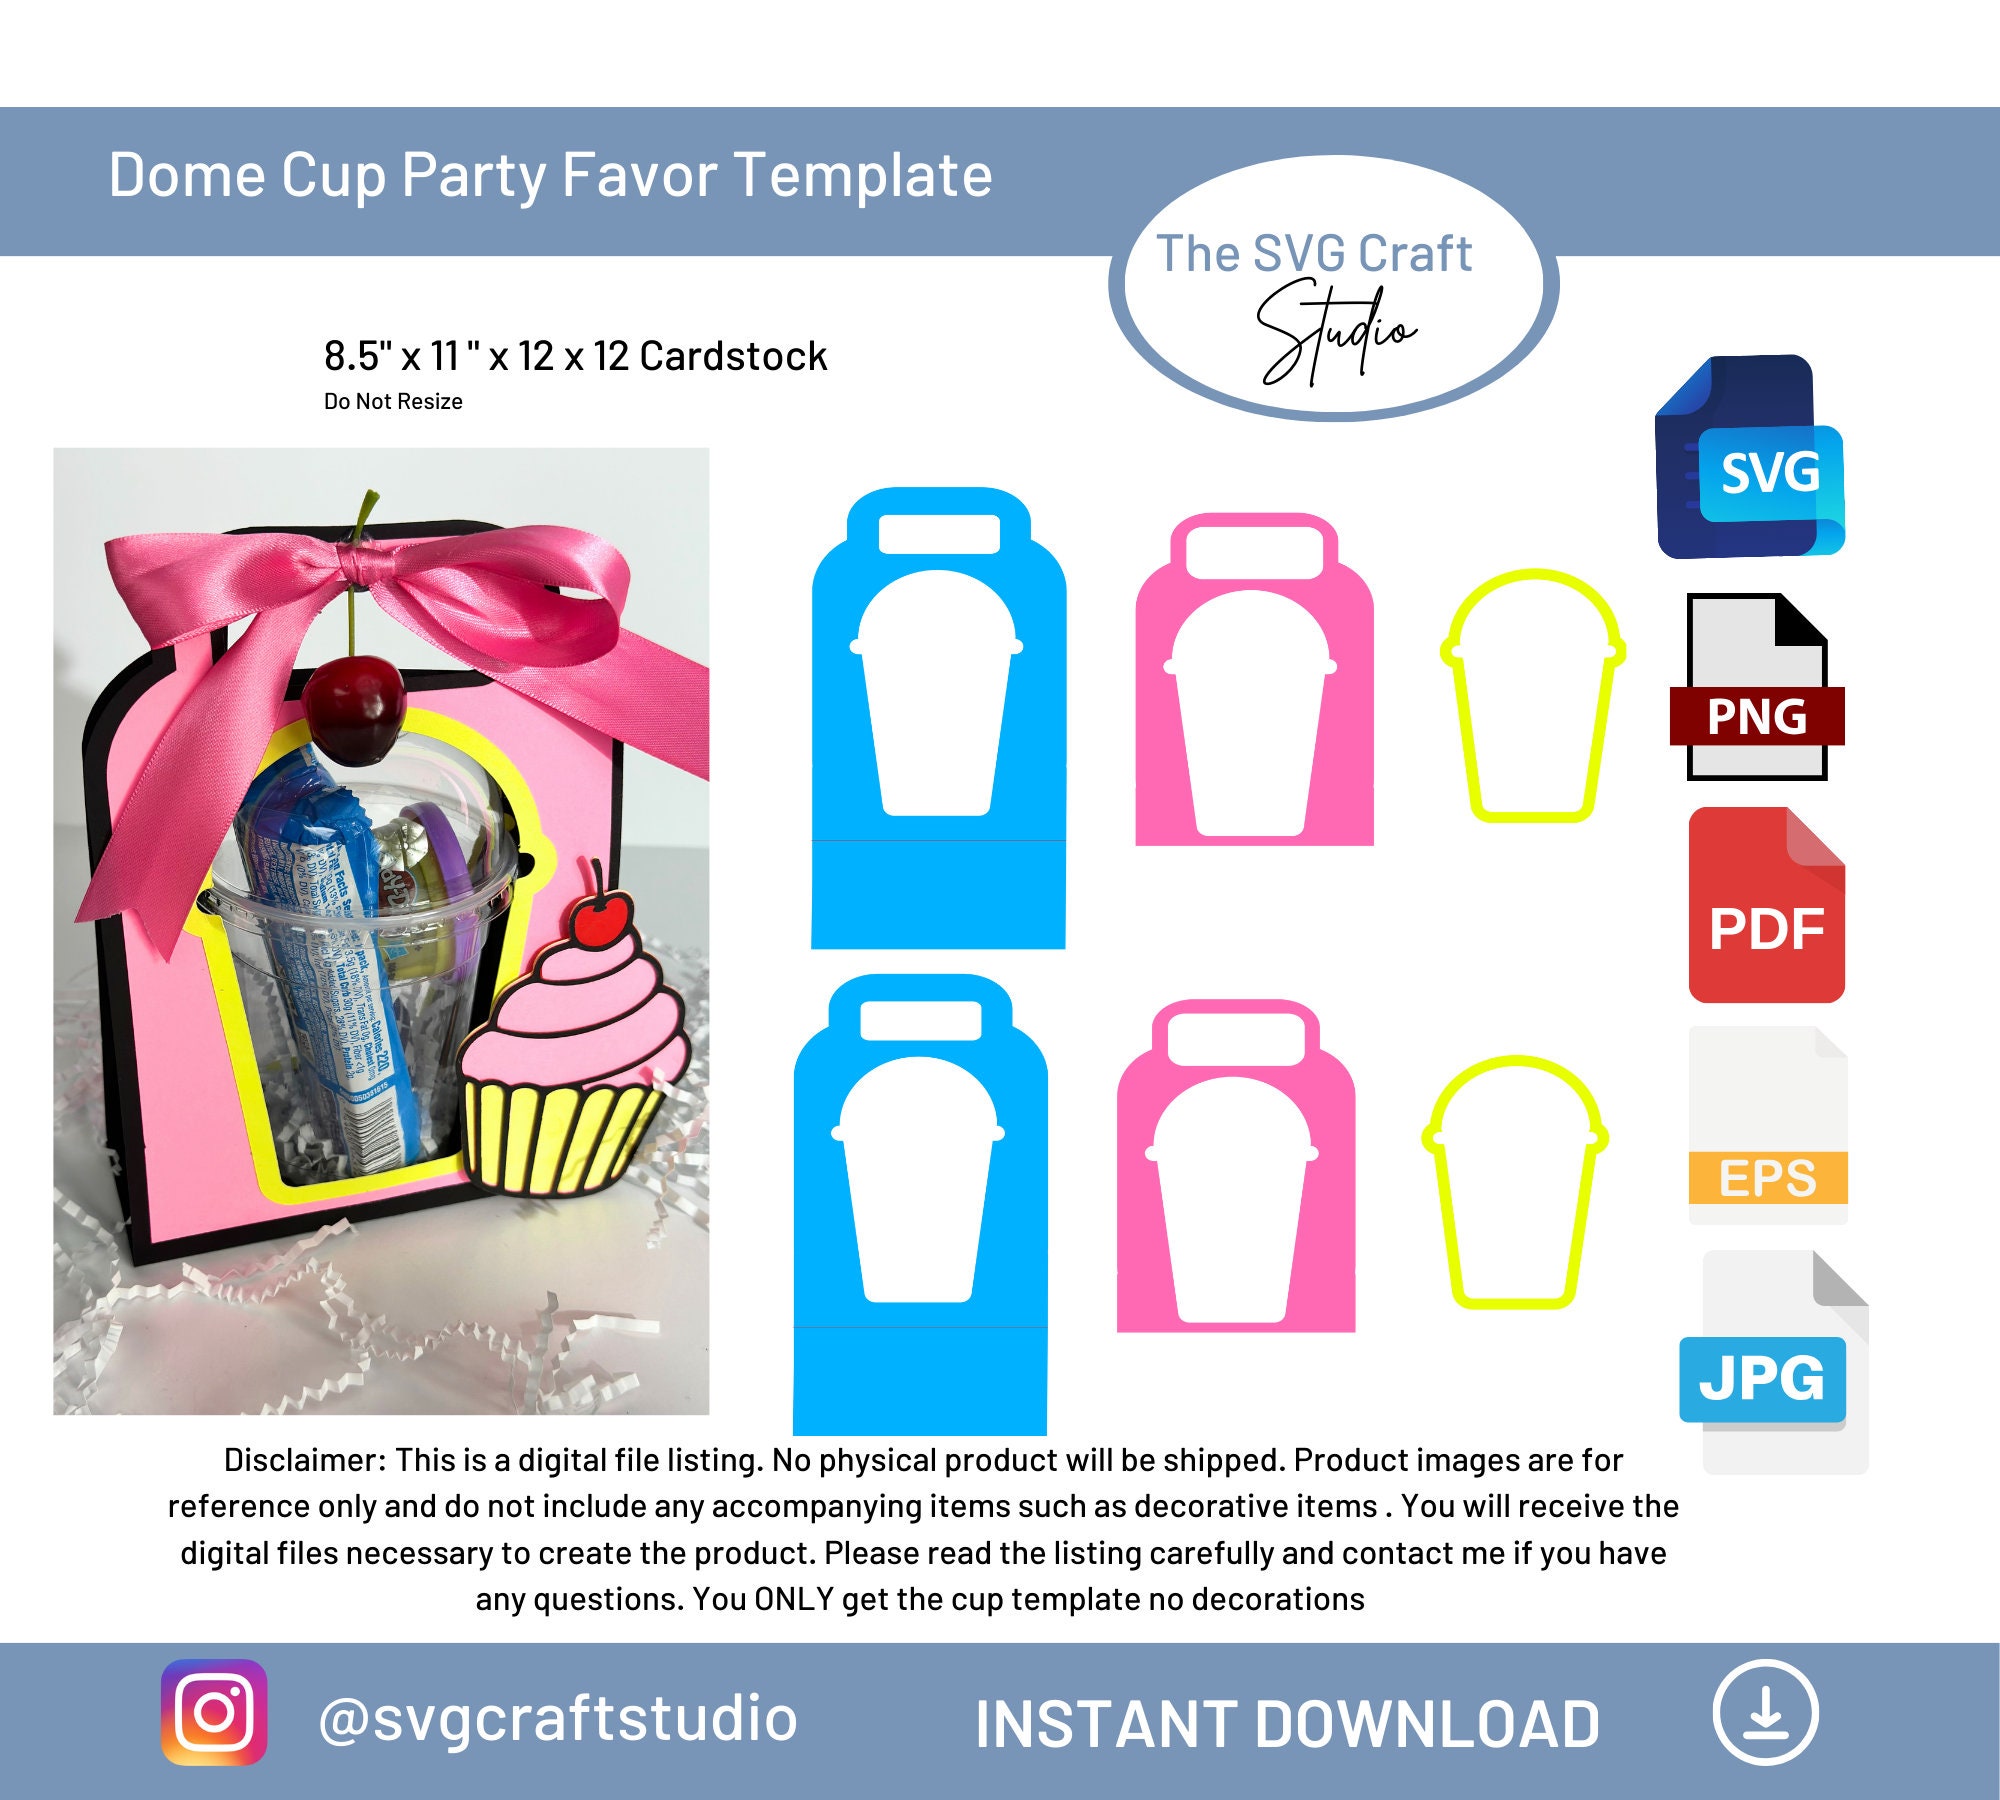 Tote-ally crafty Tote Bag Decorating kit ⋆ Made By Me Craft Parties